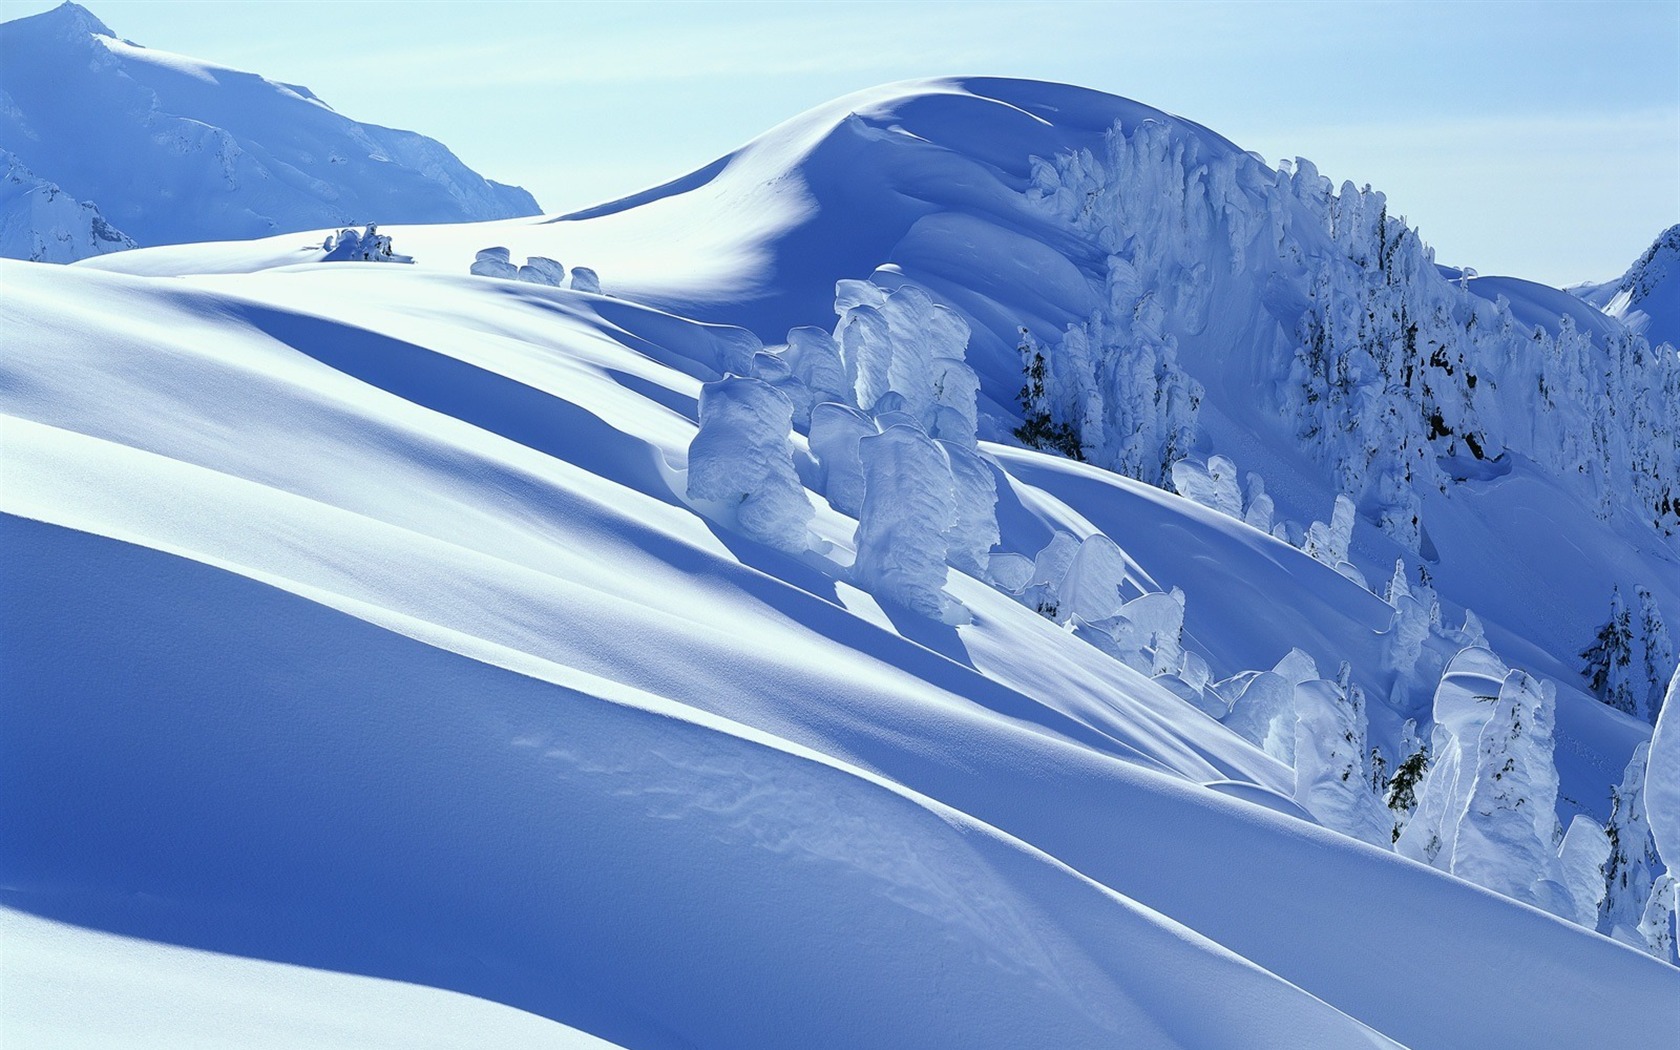 Snow wallpaper collection (2) #11 - 1680x1050